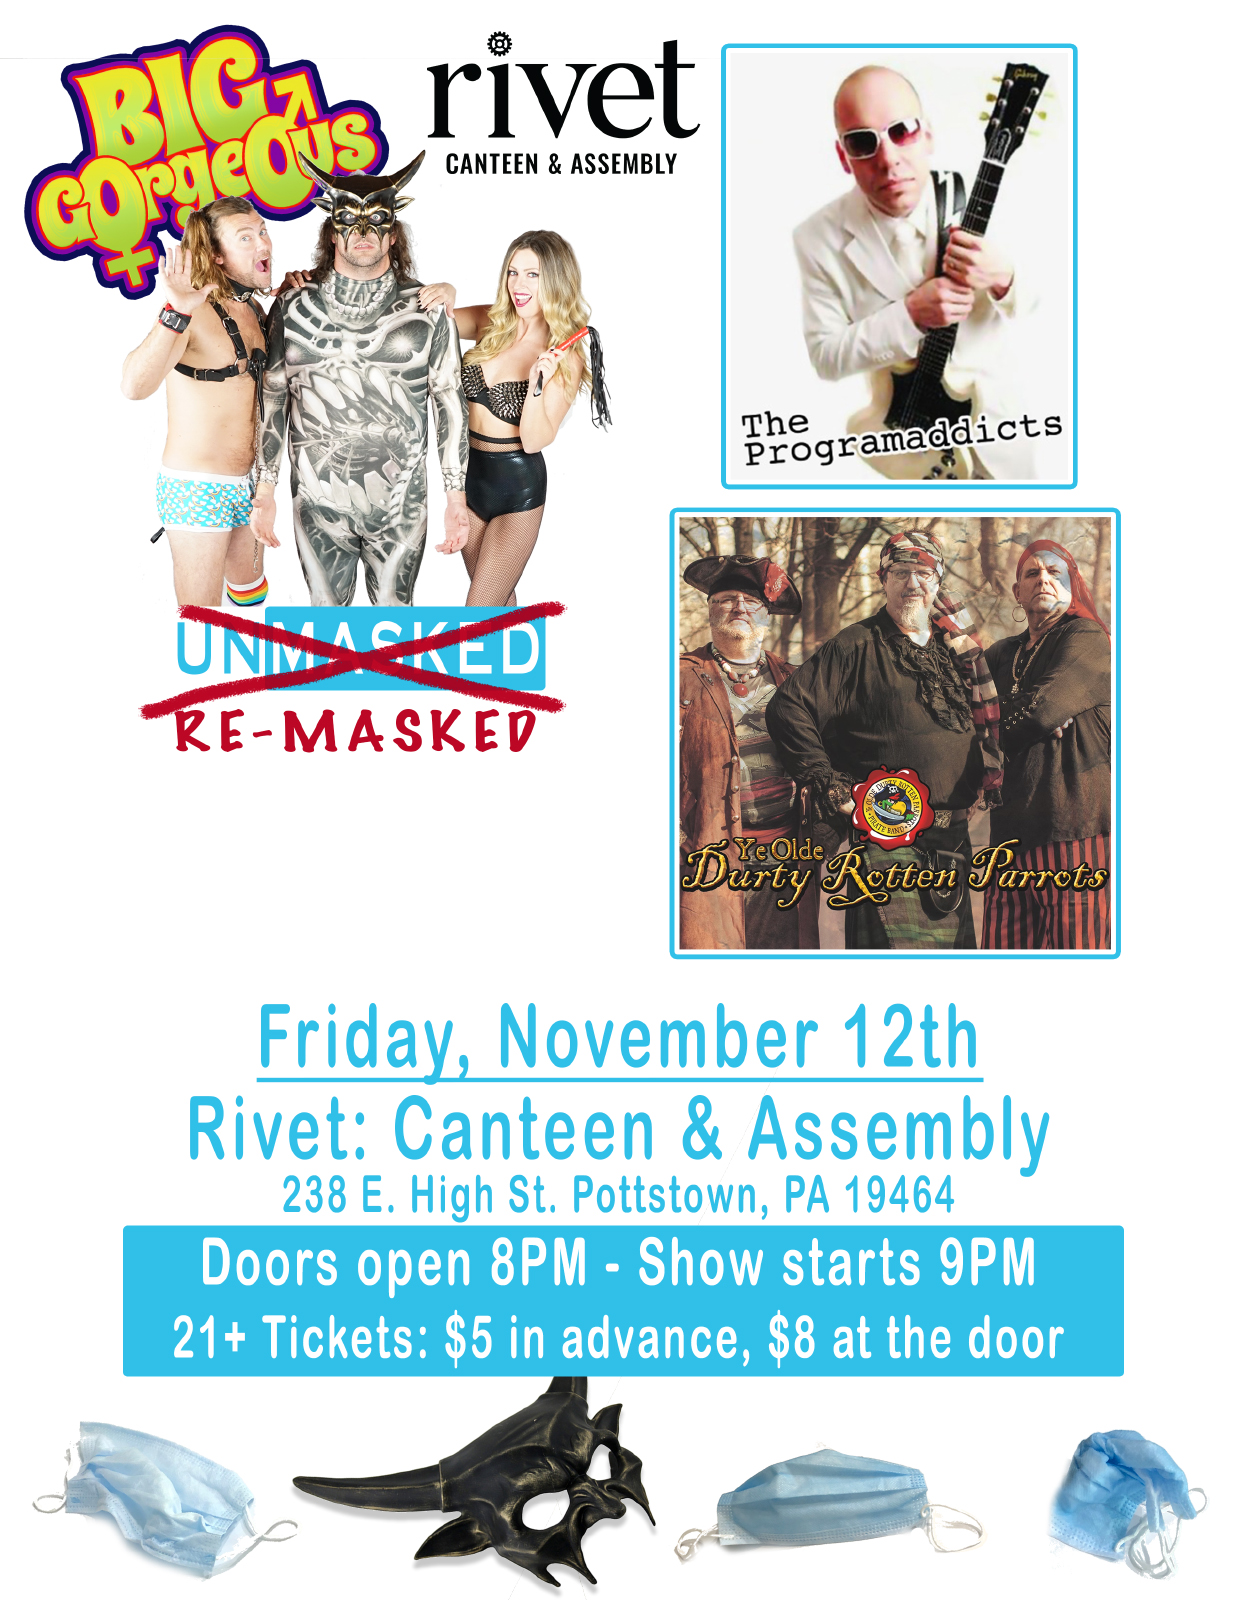 Big Gorgeous: Unmasked Tour! at Rivet: Canteen & Assembly on November 12th. With Programaddicts and Durty Rotten Parrots. Tickets $5 in advance, $8 day of show.